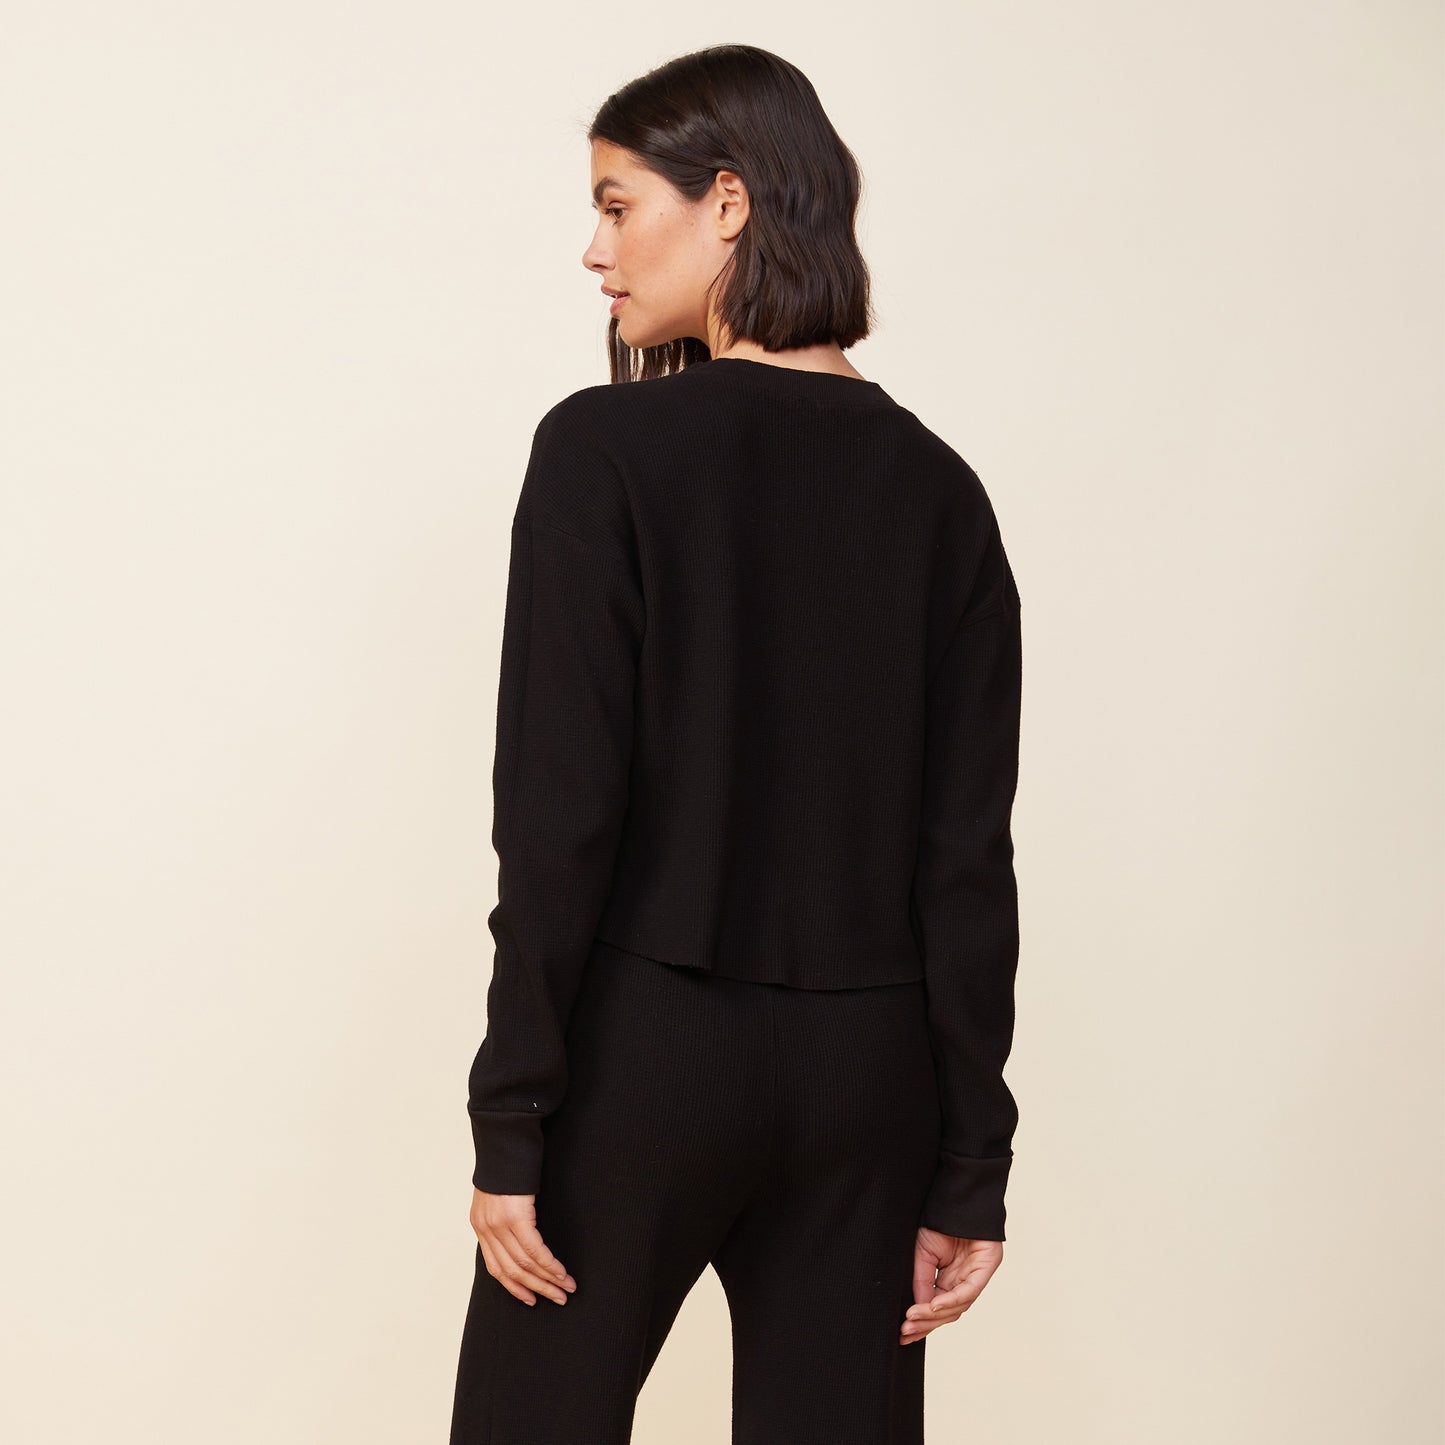 Back view of model wearing the thermal top in black.